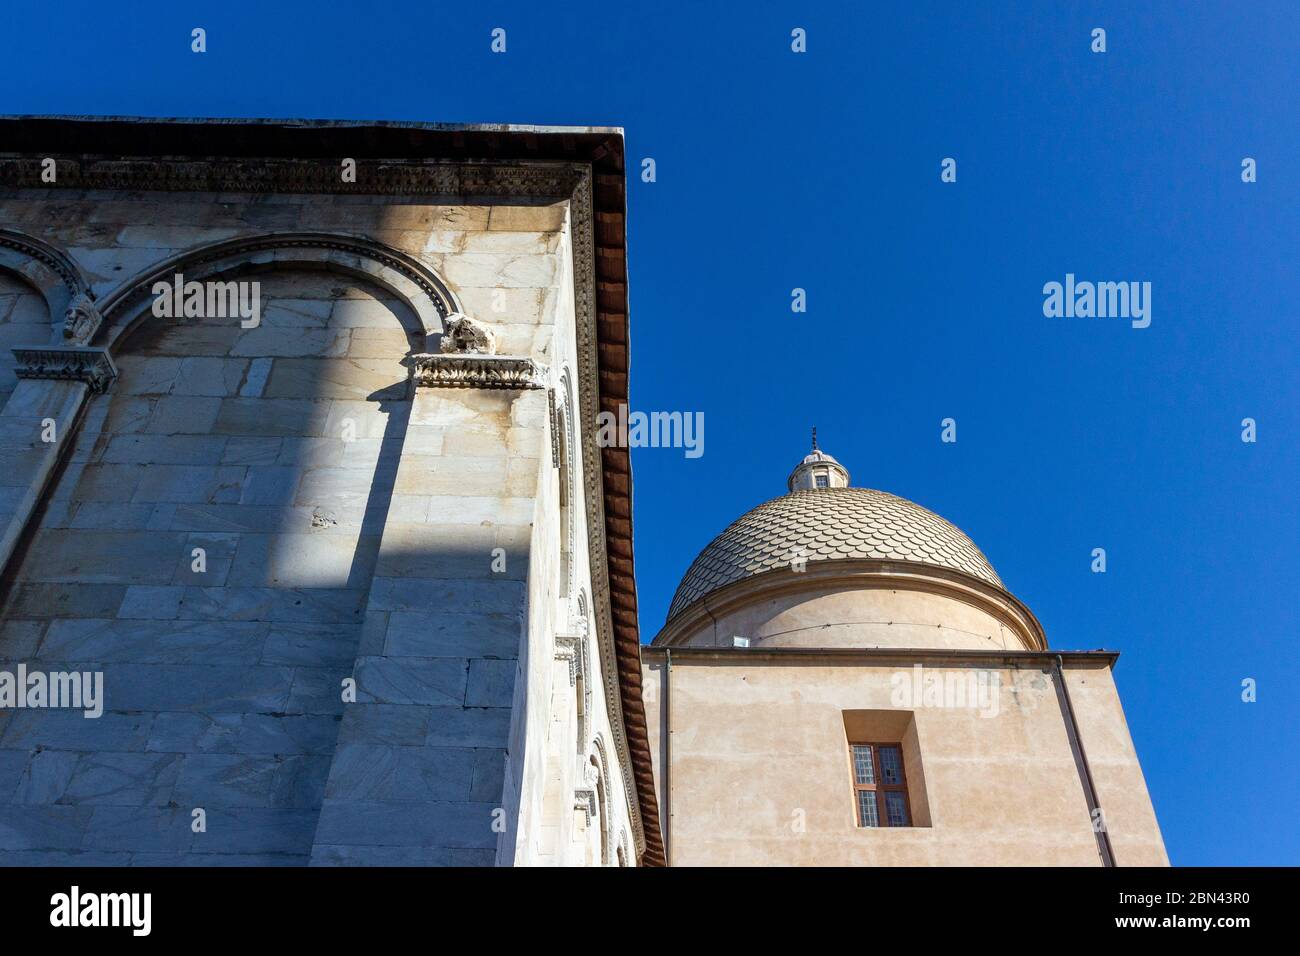 A corner of the Pisa Cathedral is illuminated by the sun against a clear-blue sky in Pisa, Italy Stock Photo